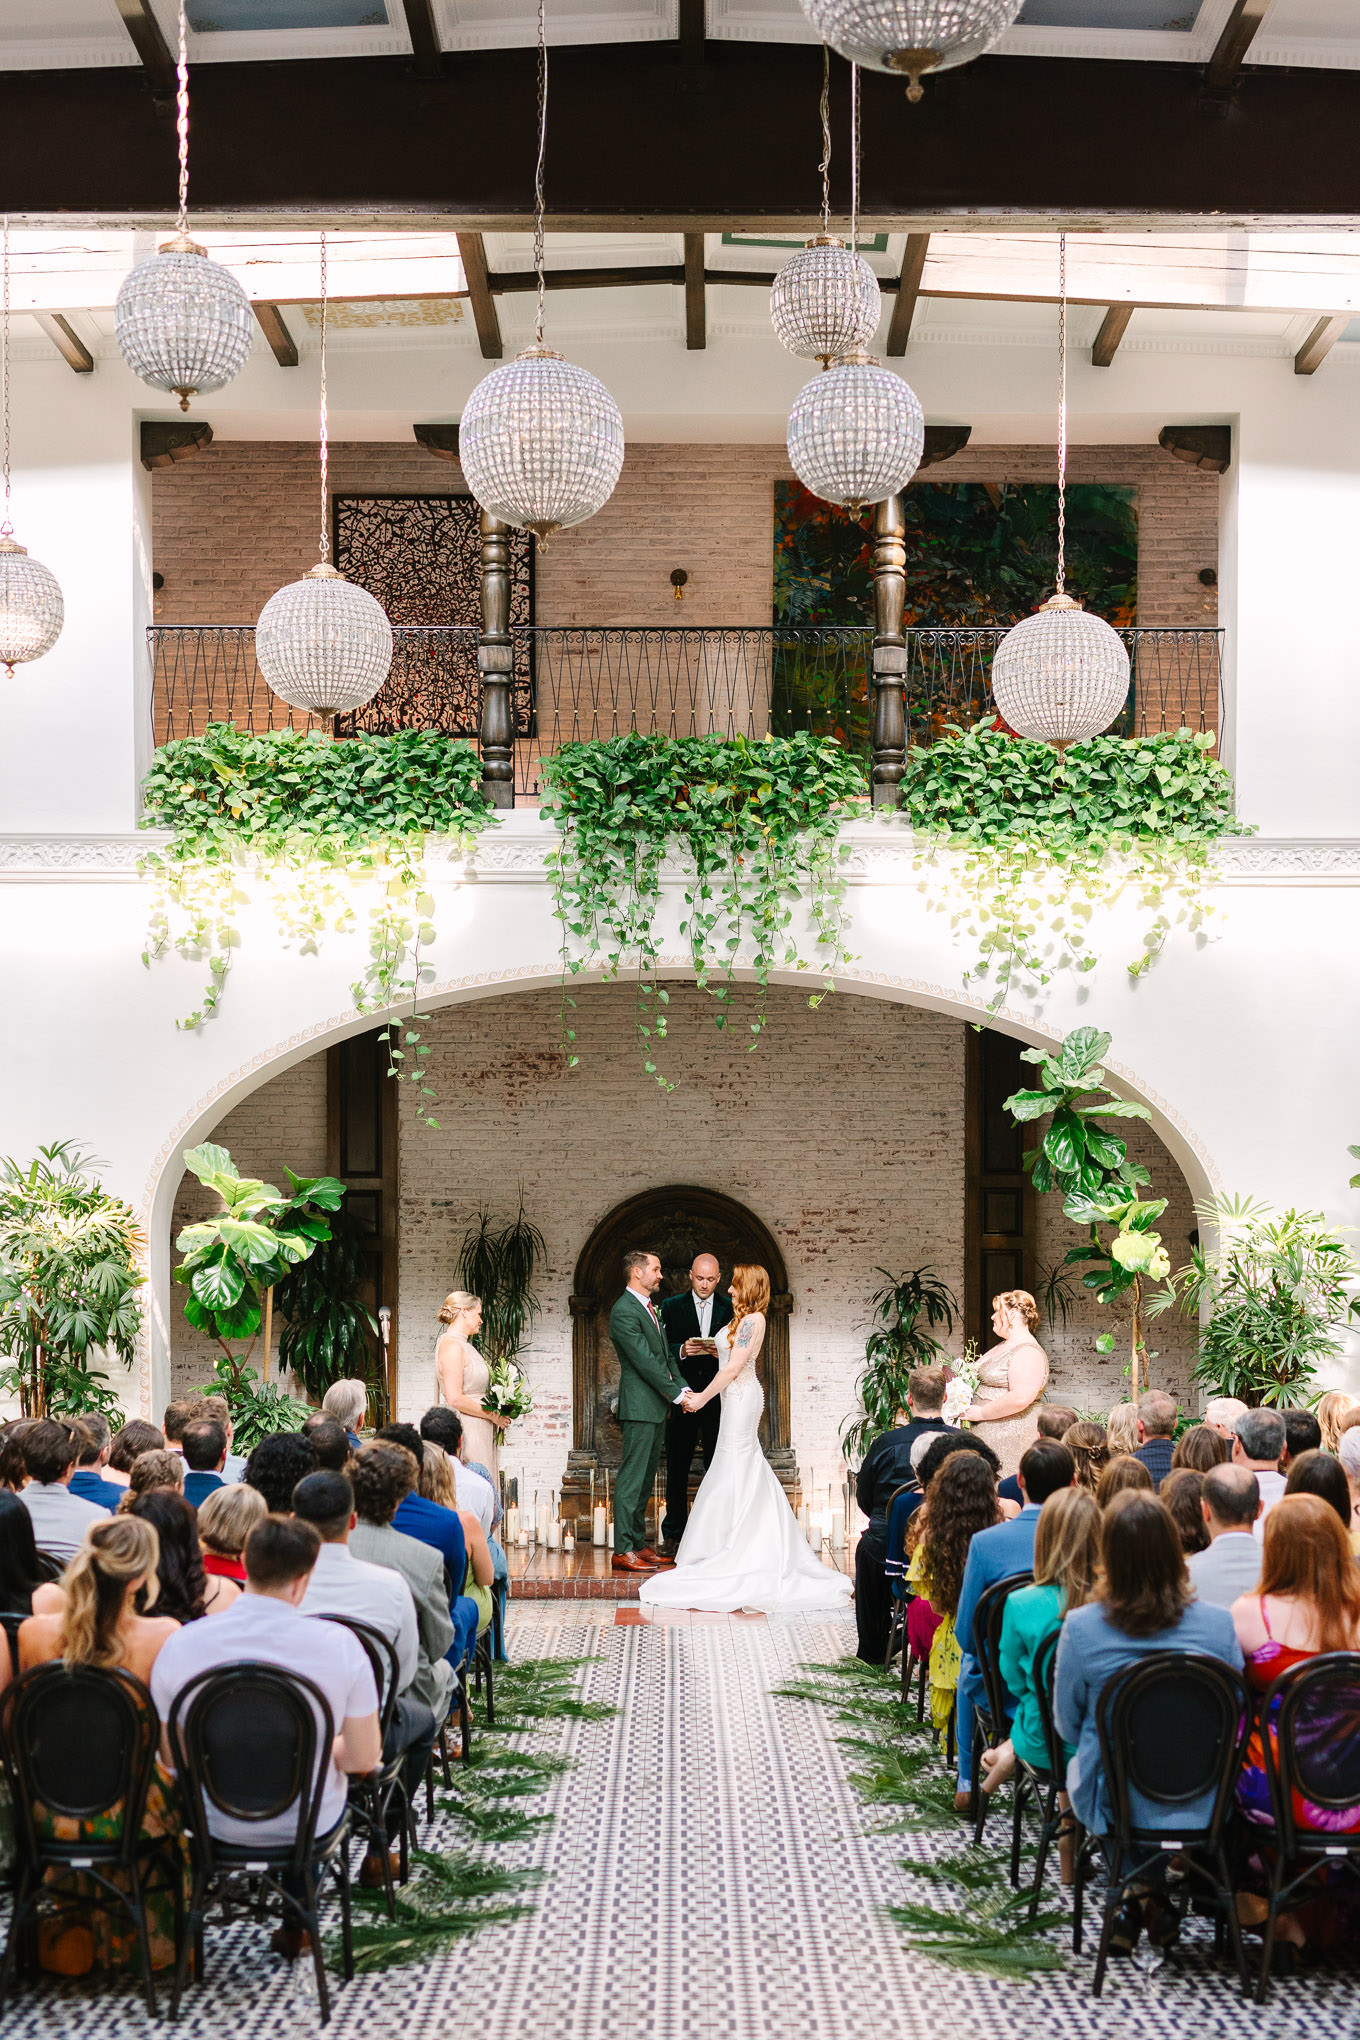 Ebell Long Beach Wedding | Wedding and elopement photography roundup | Los Angeles and Palm Springs photographer | #losangeleswedding #palmspringswedding #elopementphotographer Source: Mary Costa Photography | Los Angeles